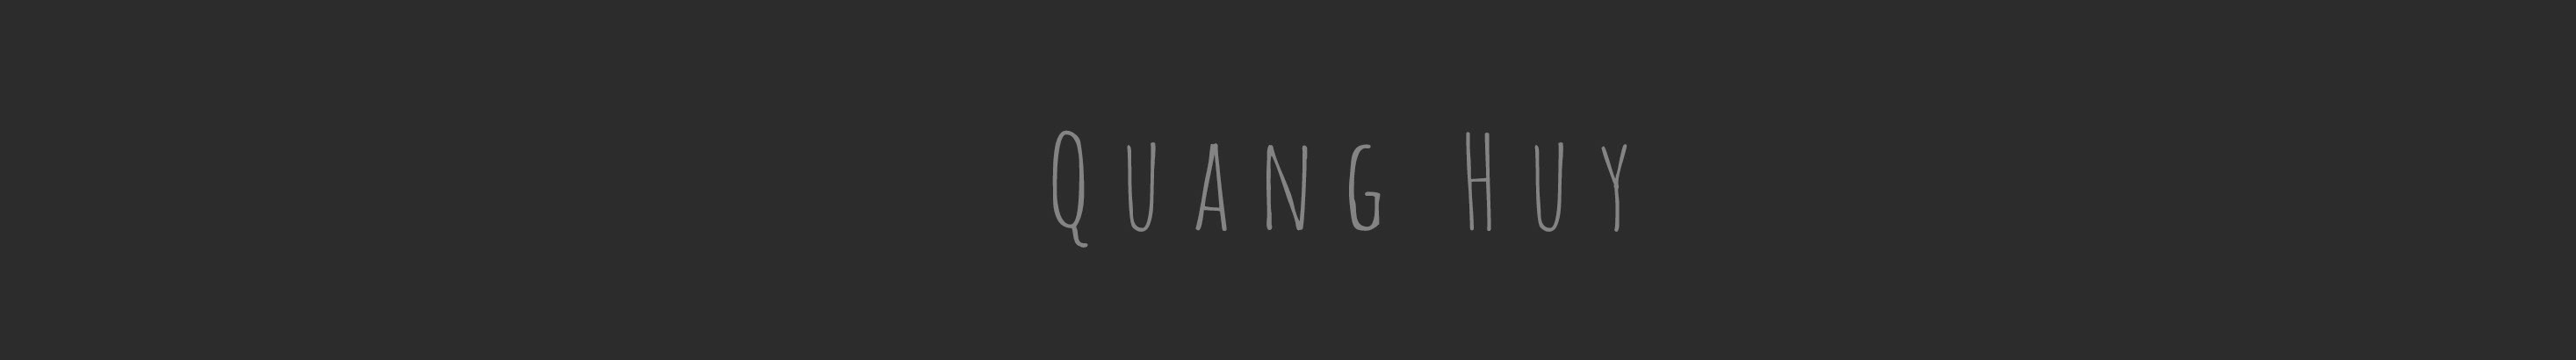 Quang Huy's profile banner